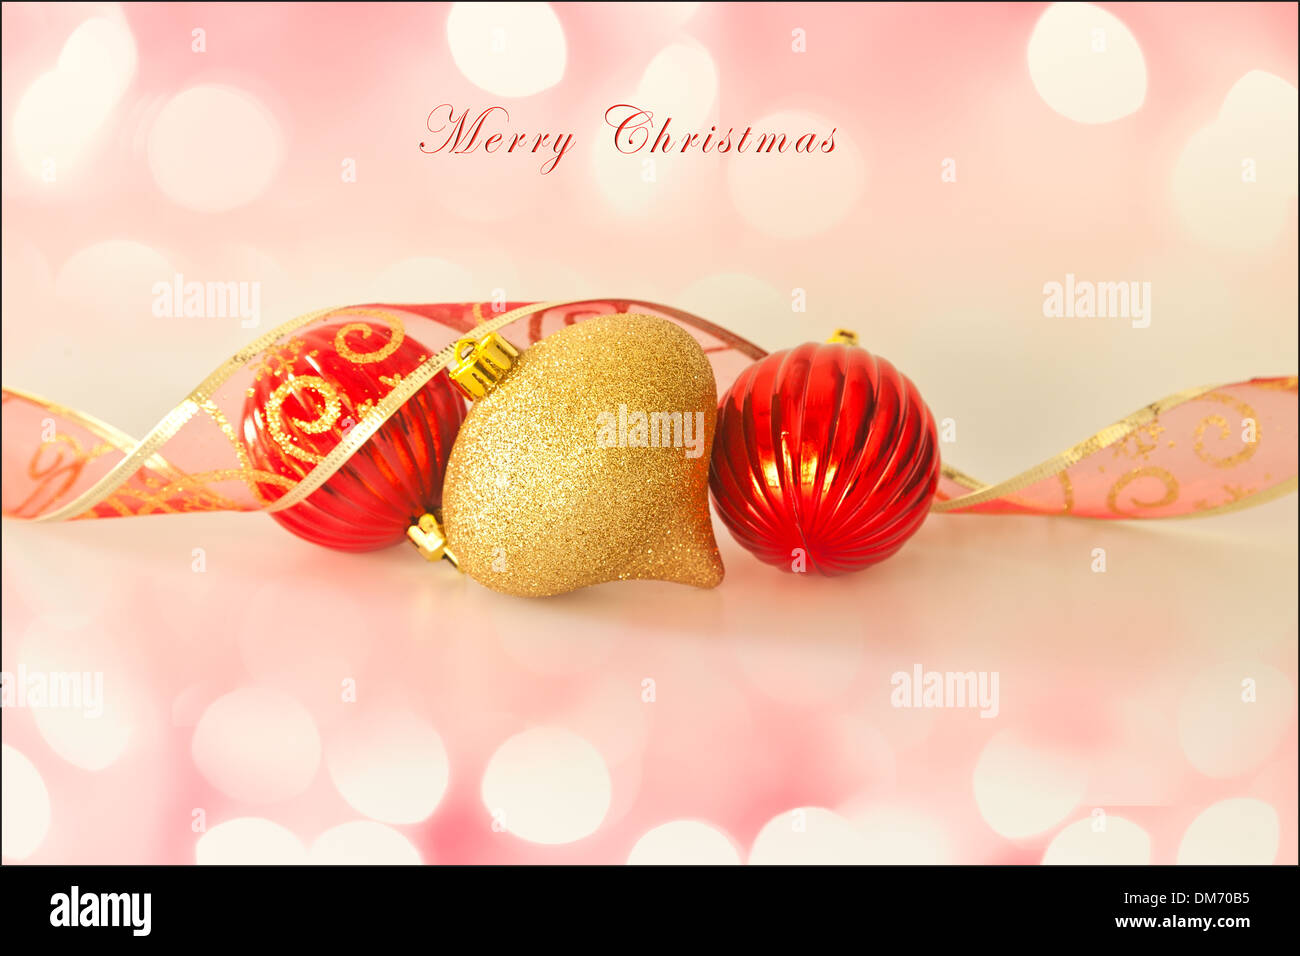 Merry Christmas card, with Christmas decorations, ribbon, soft background lights and text. Room for more text. Stock Photo